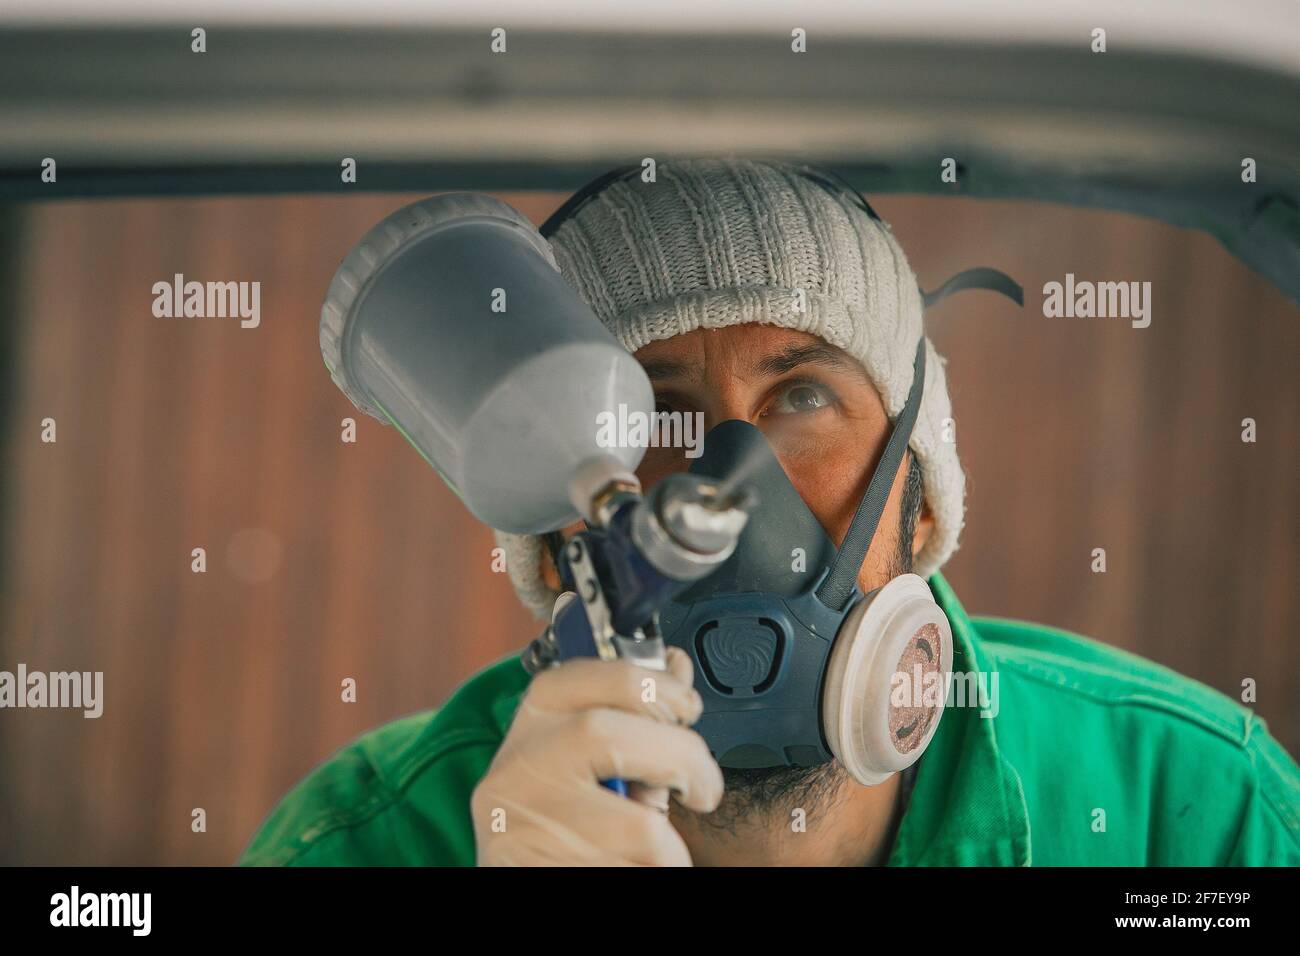 Caucasian man is spraying color with a compressed air paint gun on the vintage car as a restoration project. Man wearing protective equipment such as Stock Photo